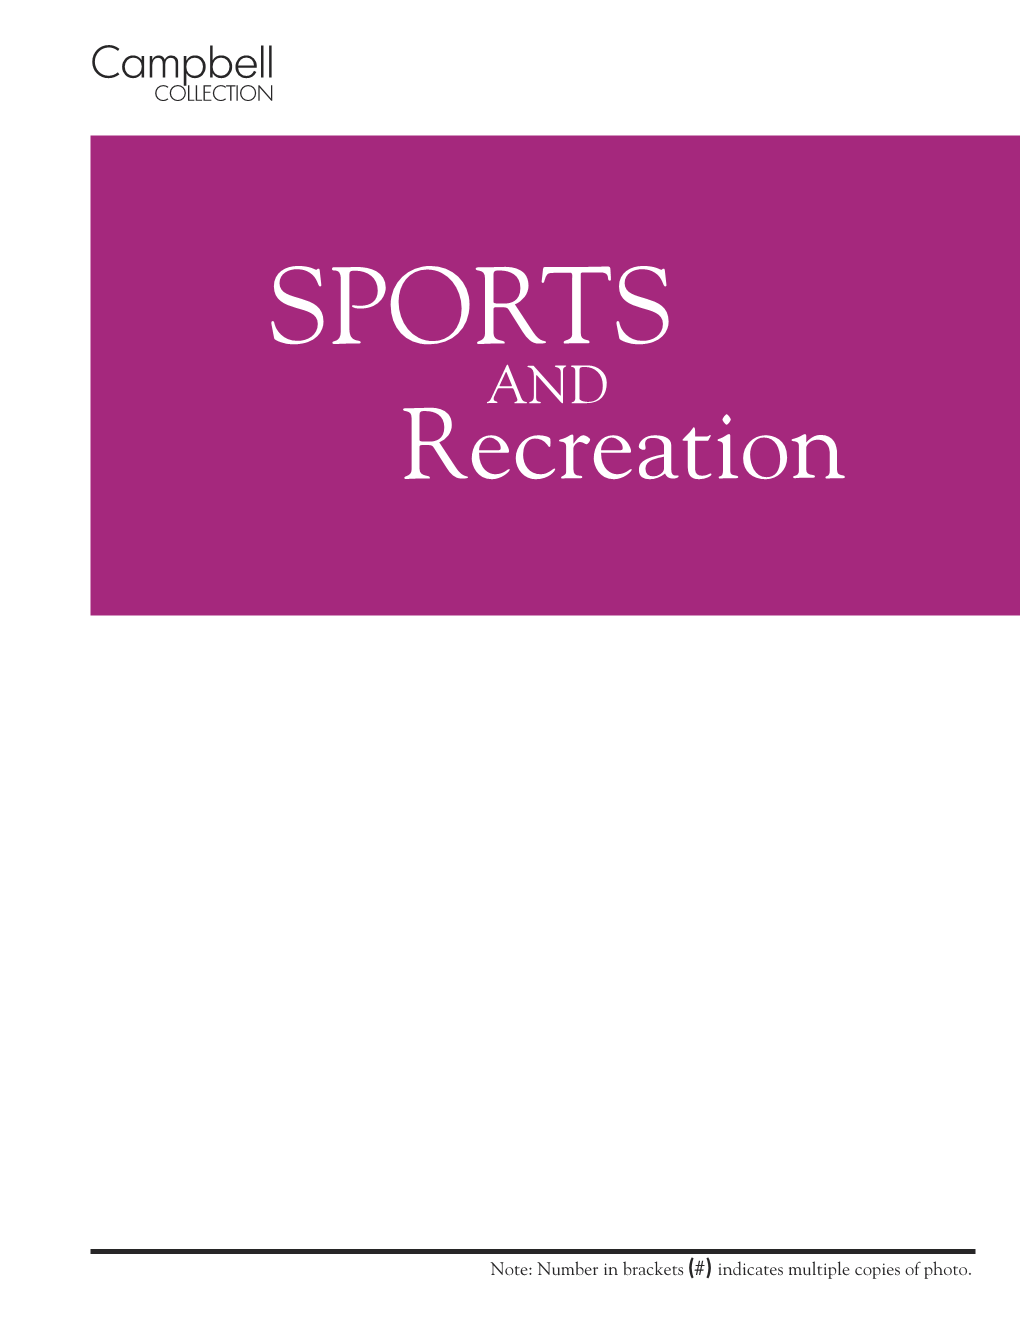 SPORTS and Recreation